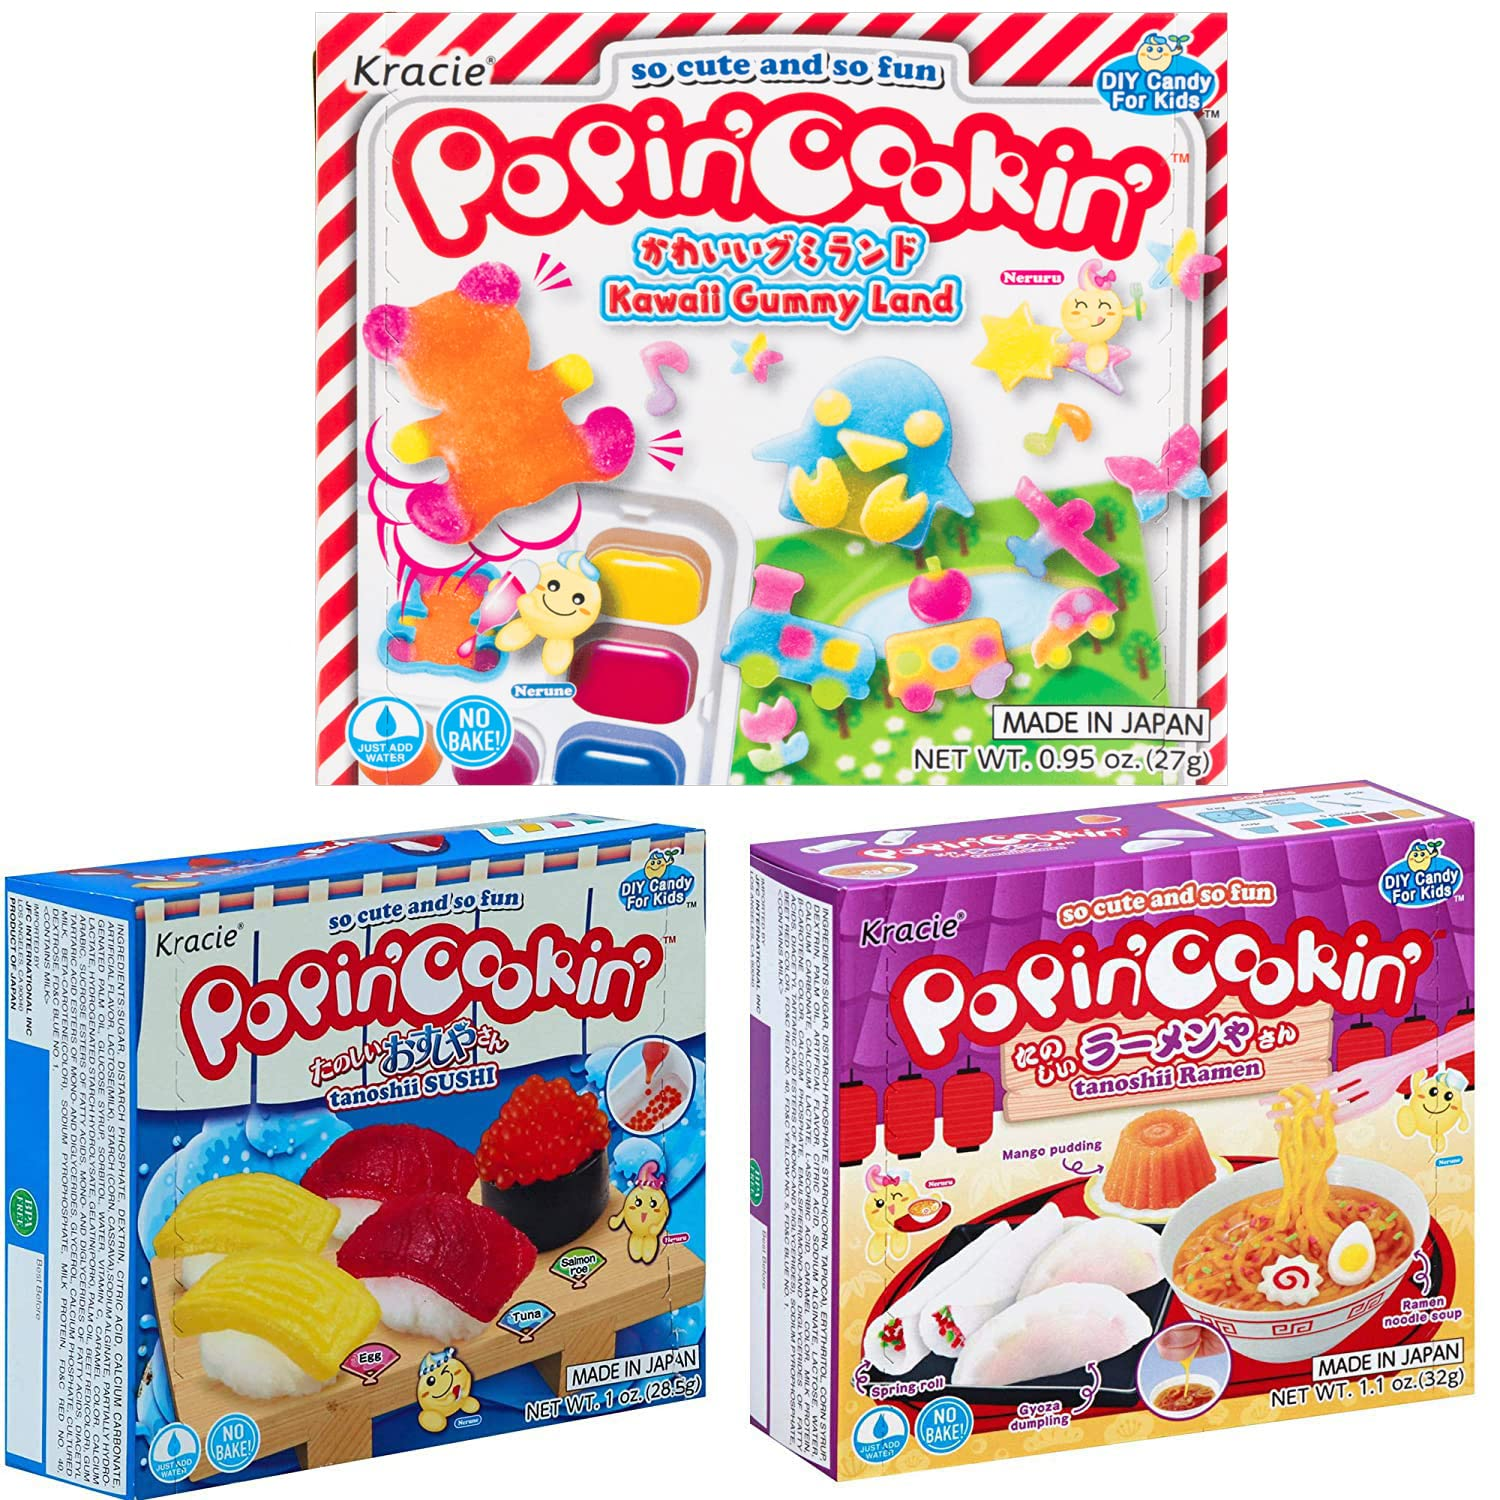 All About Kracie Popin Cookin: The DIY Japanese Candy